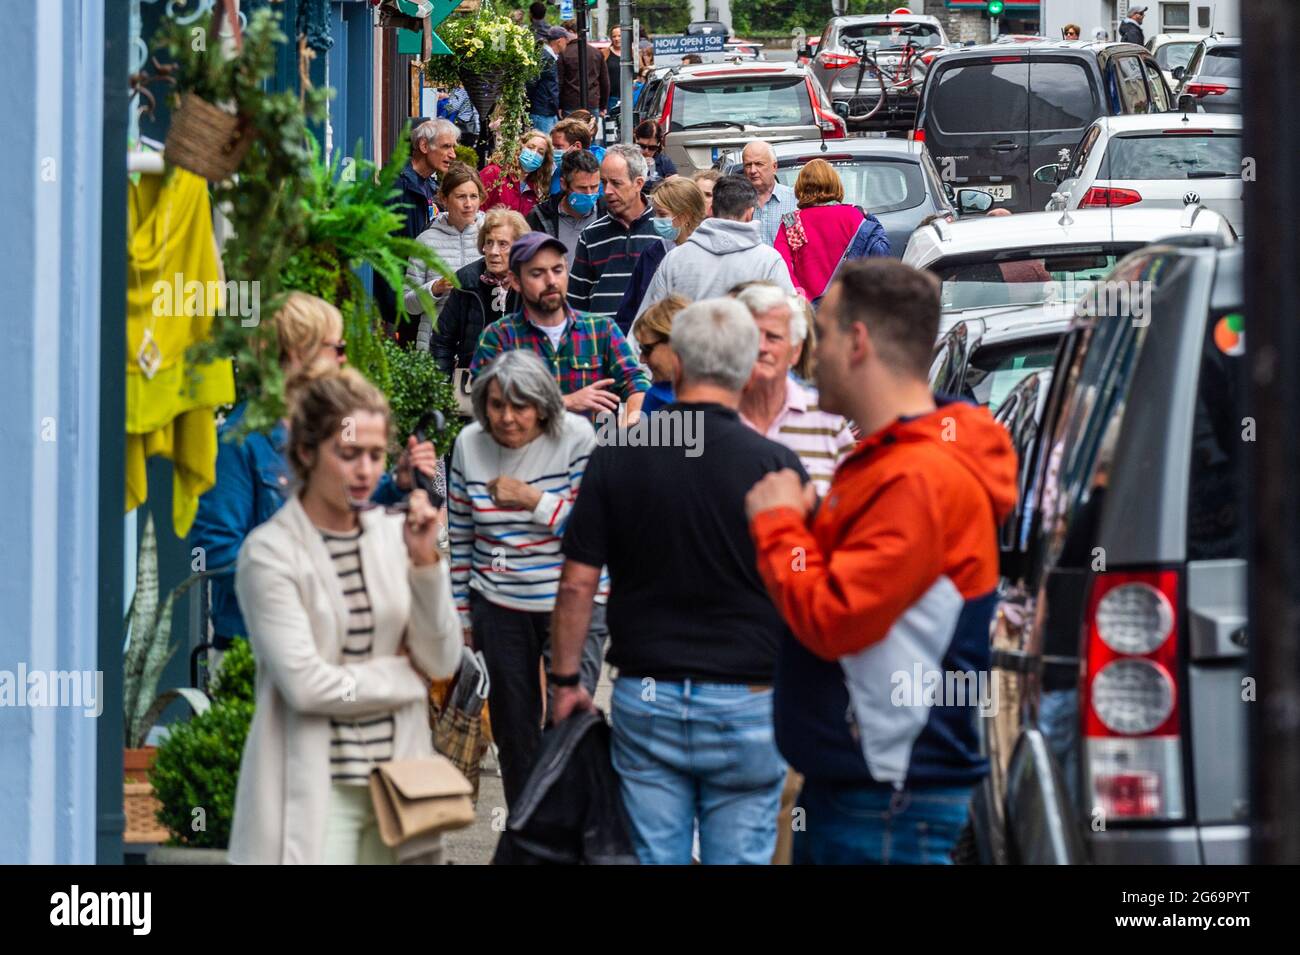 Kenmare, Co. Kerry, Ireland. 4th July, 2021. The Co. Kerry town of Kenmare was very busy today, with many people eating outside as COVID-19 restrictions forbid people to eat indoors. A few people wore facemasks, but most tourists were mask-free. Credit: AG News/Alamy Live News Stock Photo